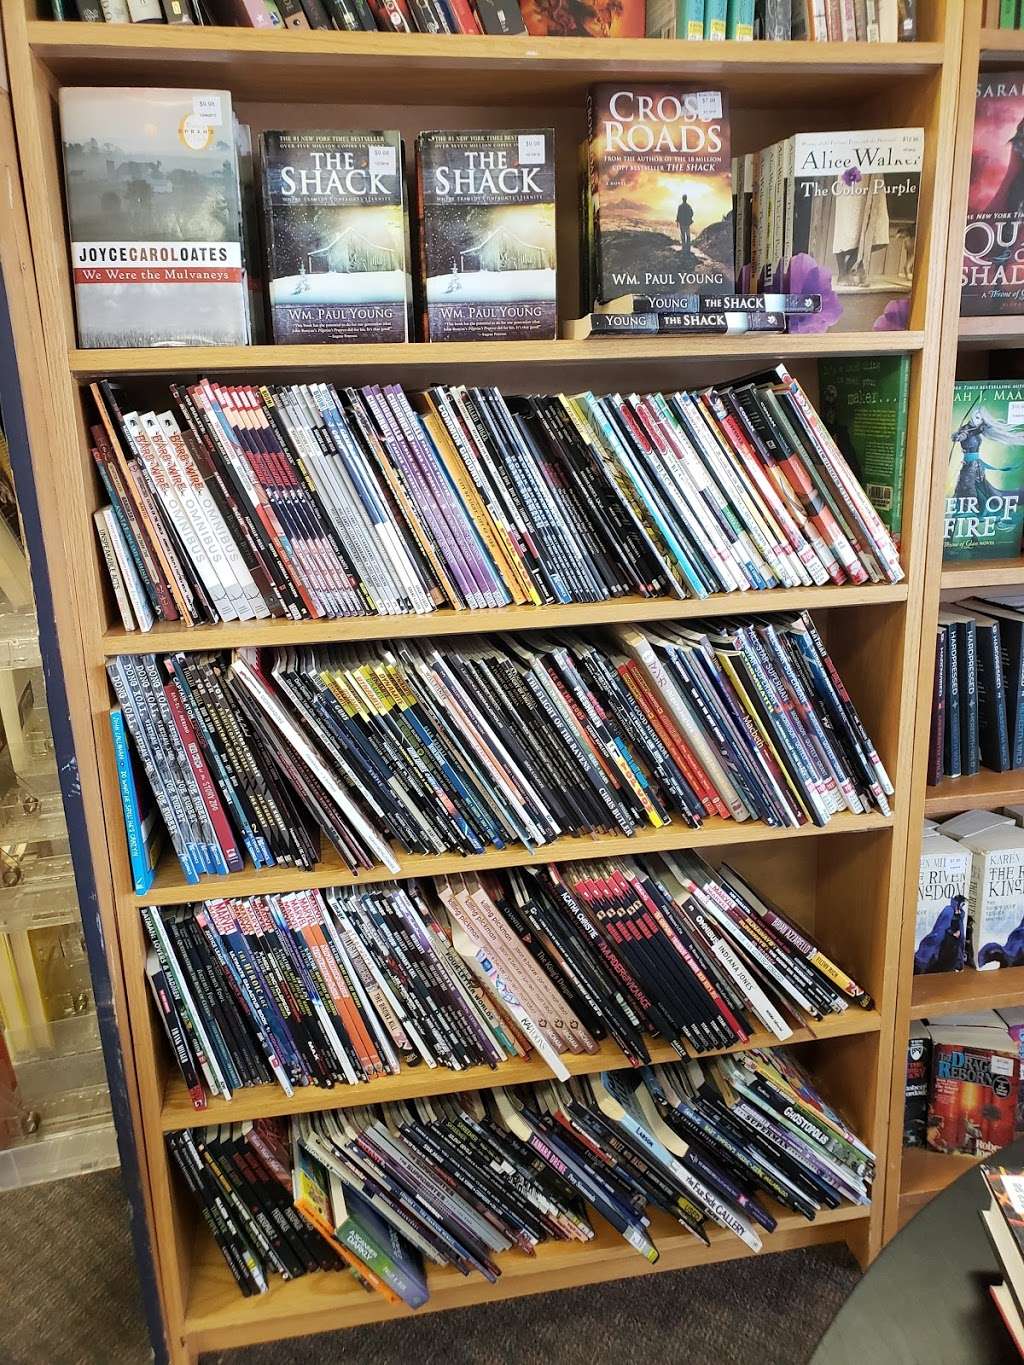 Books on Sale | 4200 S East St #20, Indianapolis, IN 46227 | Phone: (317) 788-2667